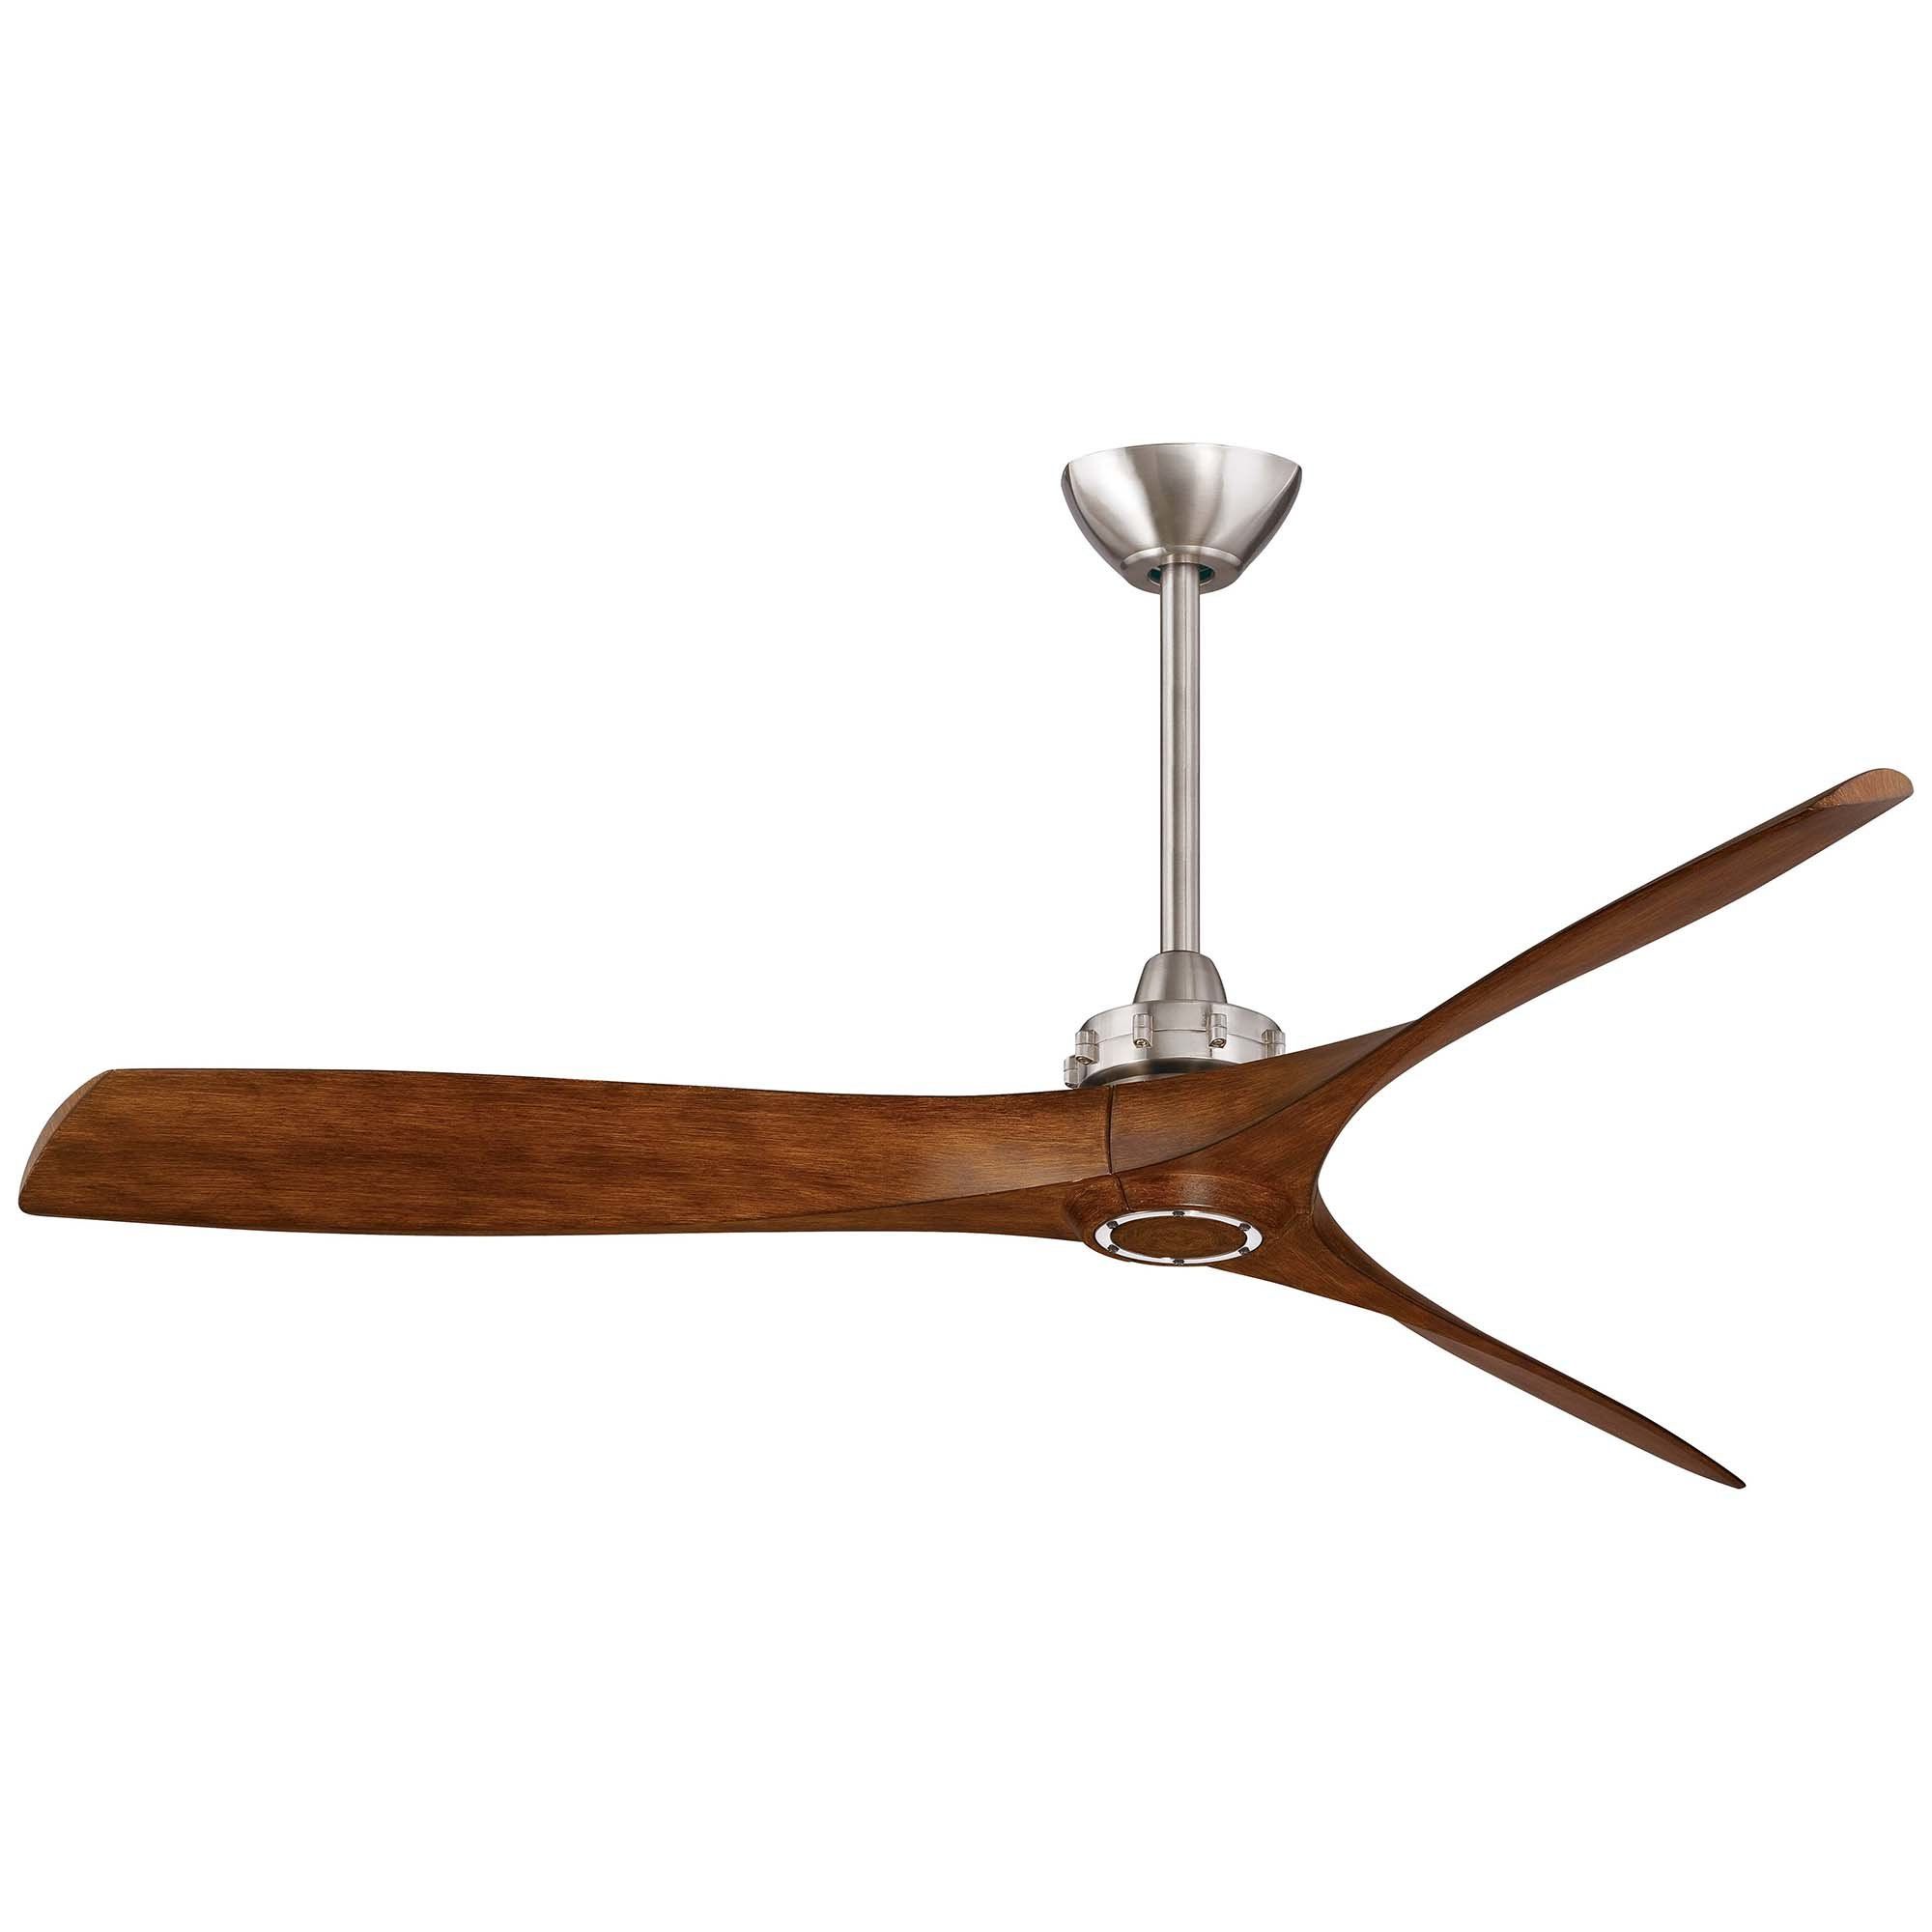 Minka Aire 60 Aviation 3 Blade Ceiling Fan With Remote Pertaining To Best And Newest Calkins 5 Blade Ceiling Fans (View 20 of 20)